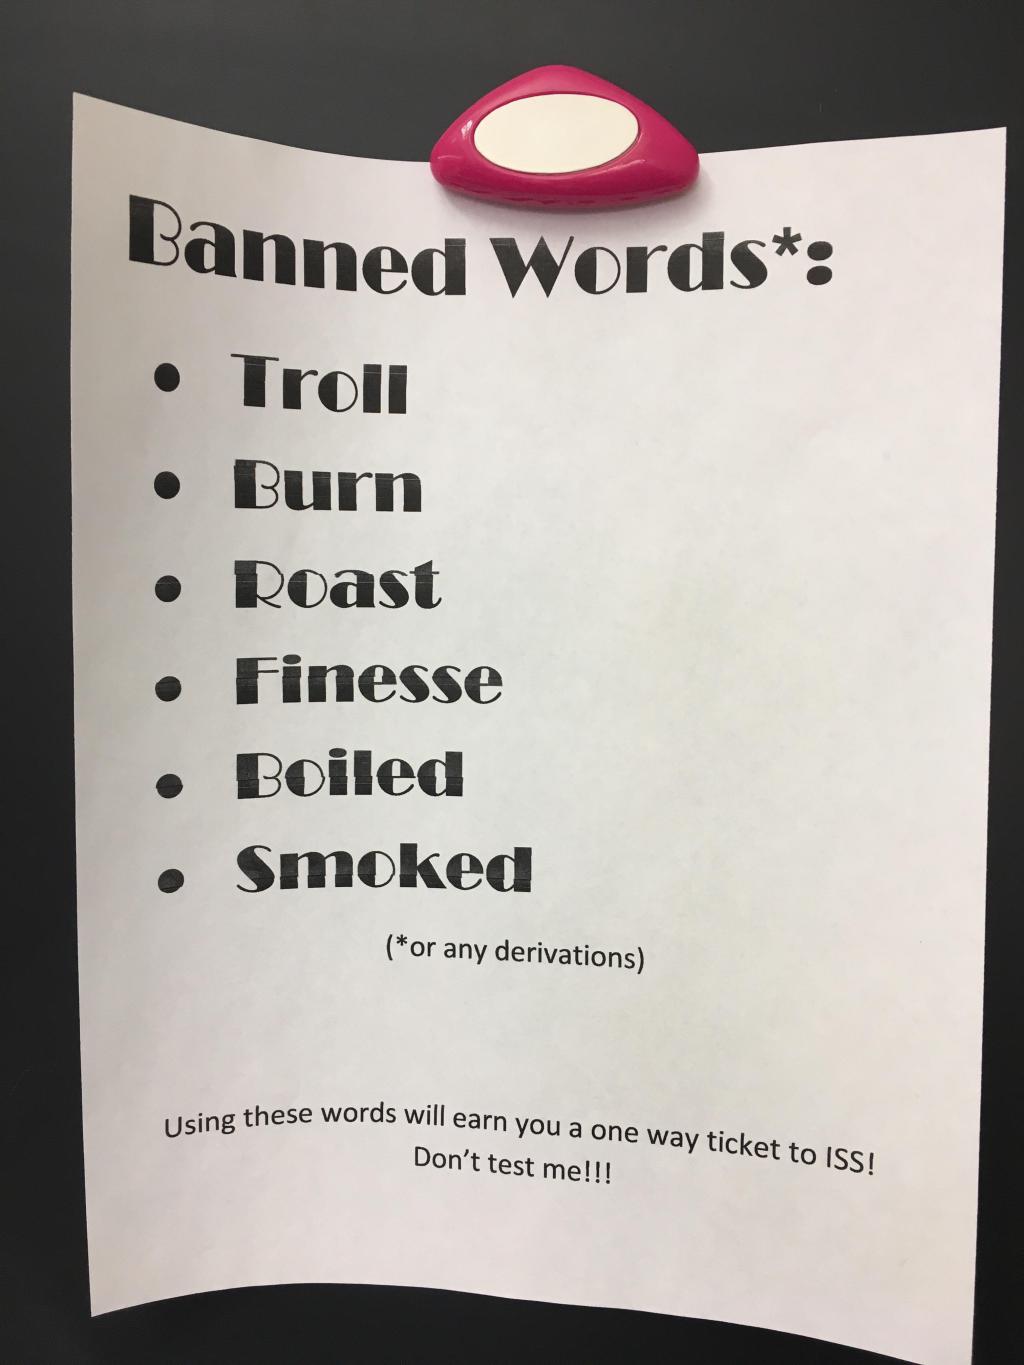 savage roasts for teachers - Banned Words Troll Burn Roast Finesse Boiled Smoked or any derivations Using these words these words will earn you a one way ticket to Issi Don't test me!!!